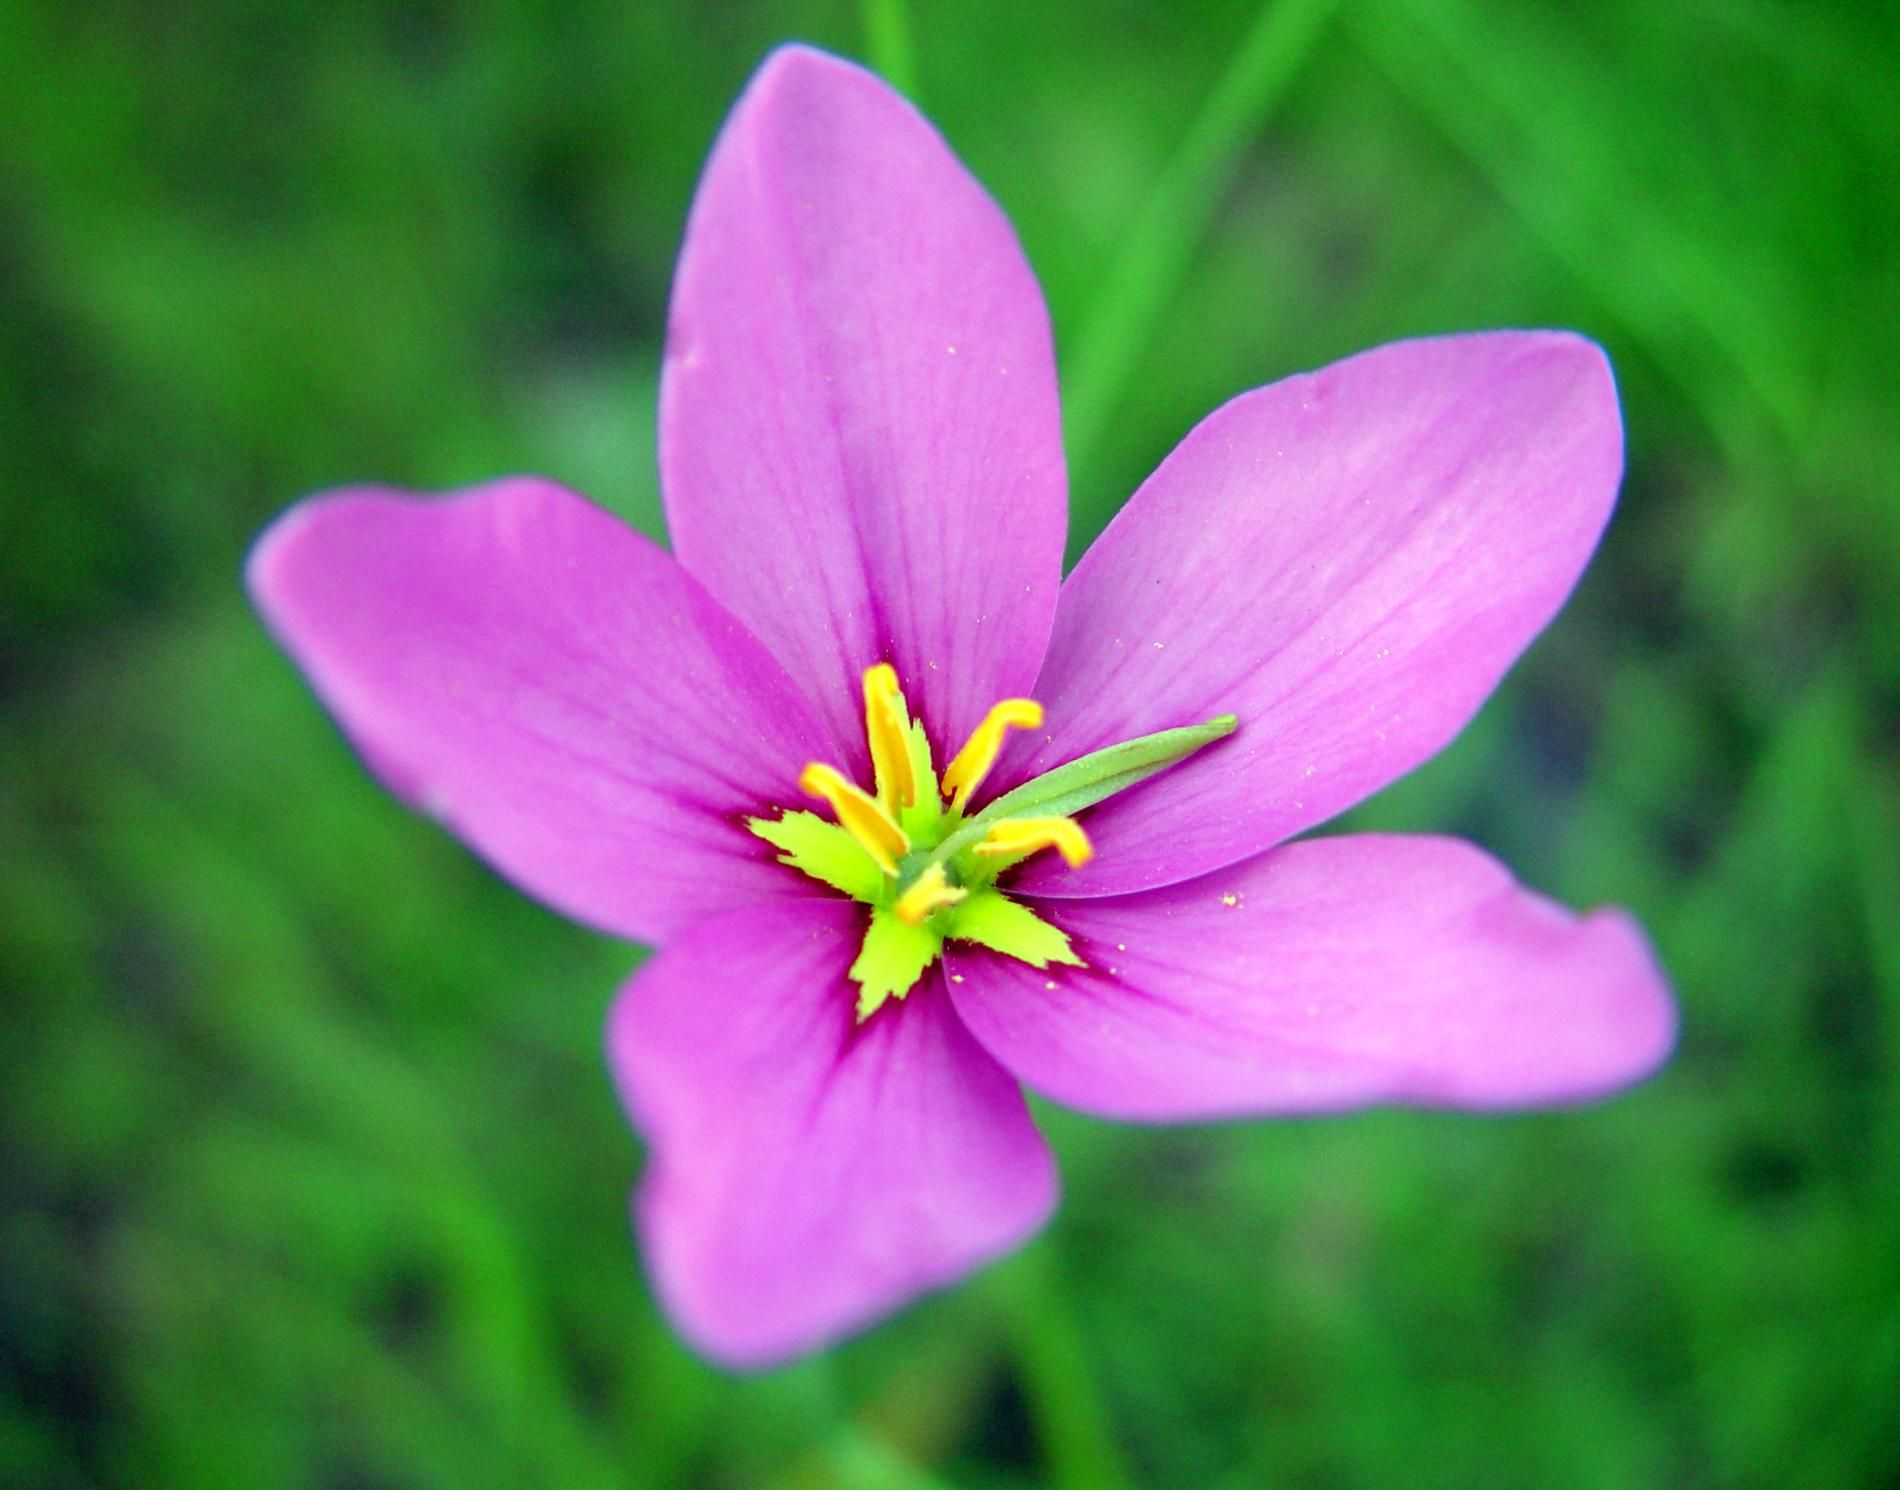 File:A Florida native pink flower found in wetland areas.jpg ...